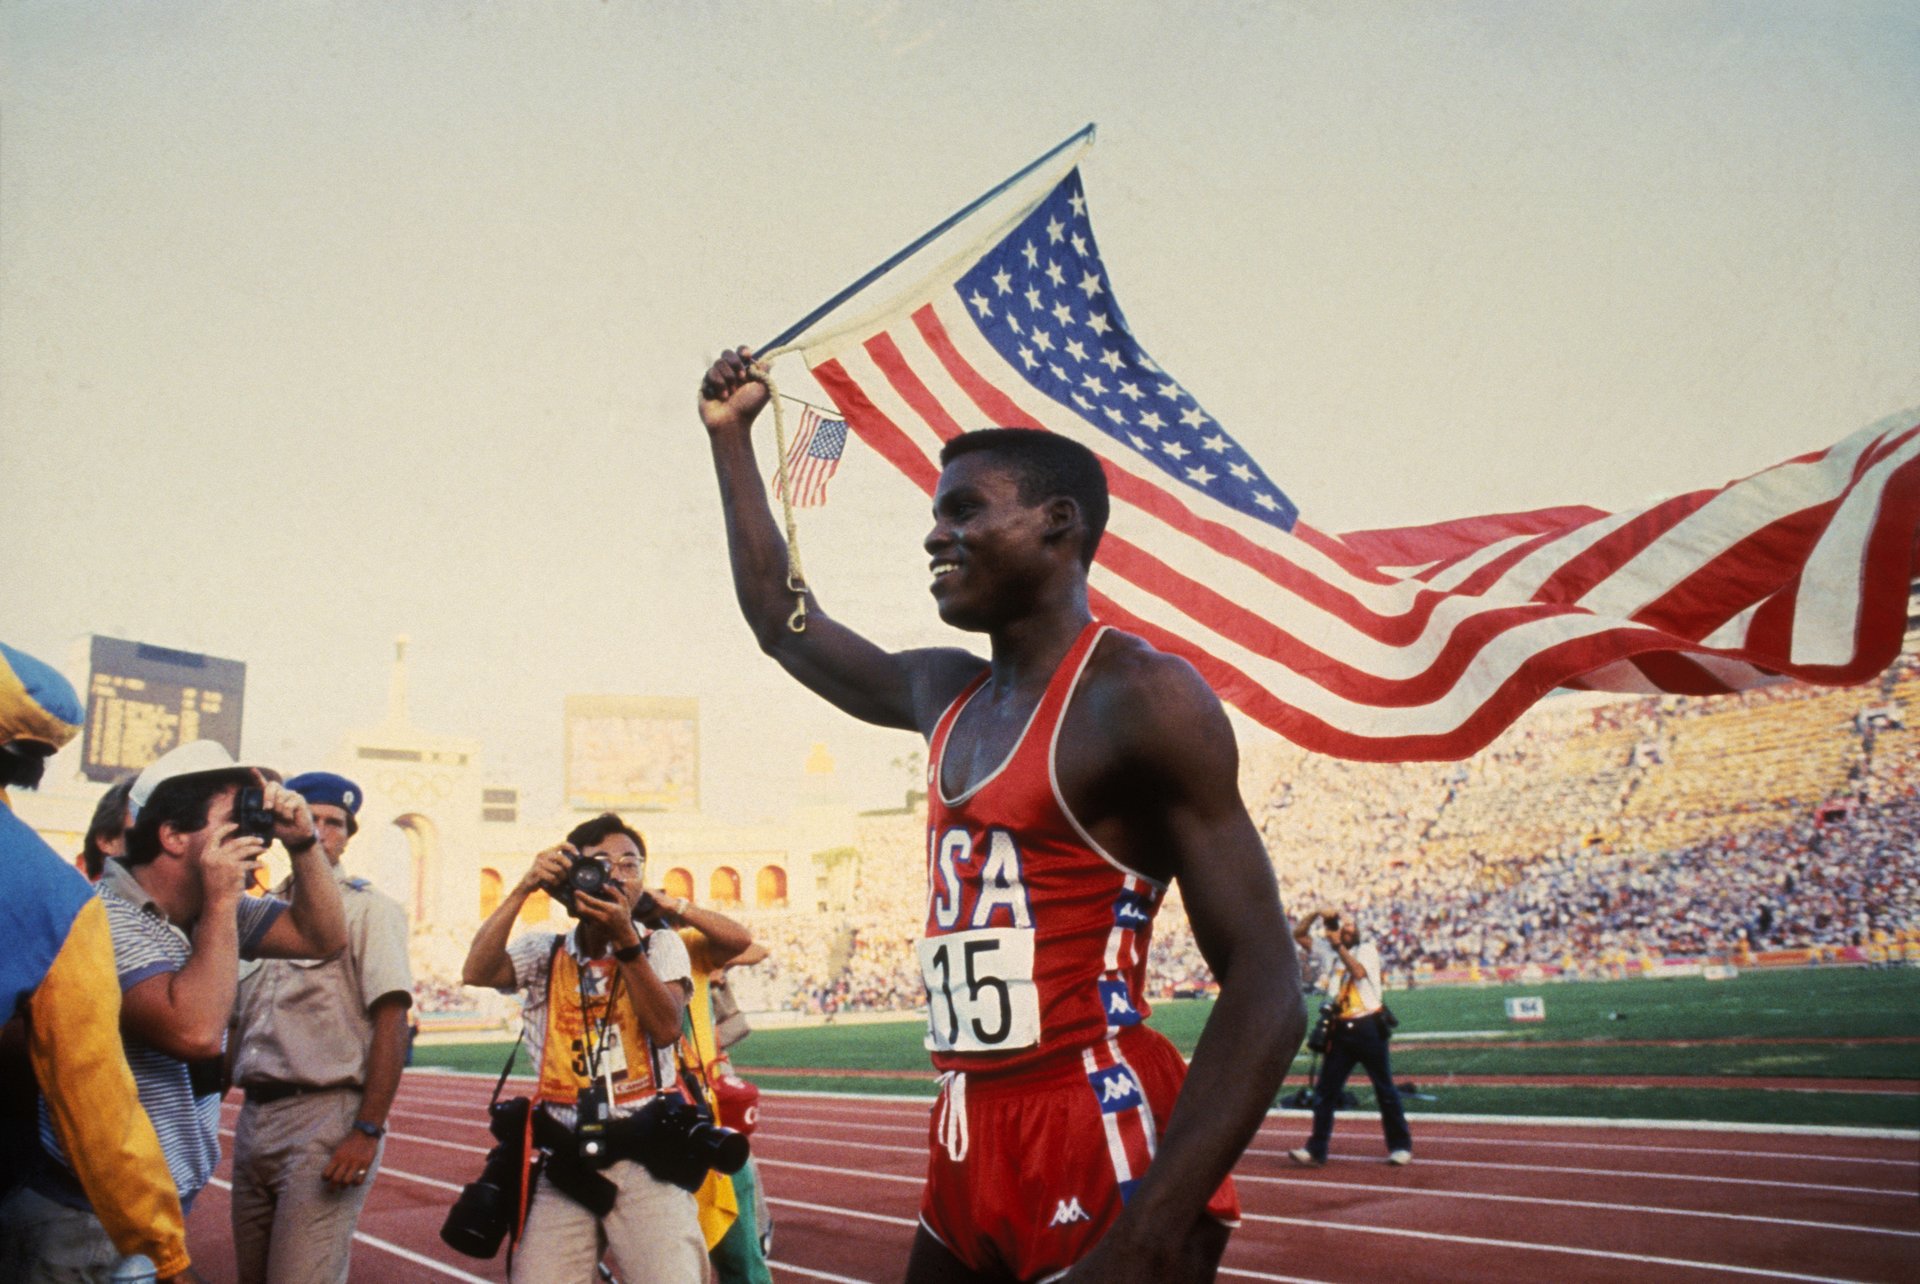 TRACK & FIELD ICON CARL LEWIS GETS FEATURE DOC EXEC PRODUCED BY UNINTERRUPTED, FROM NOAH MEDIA GROUP AS PART OF PREVIOUSLY ANNOUNCED MULTIMILLION DOLLAR CONTENT FUND